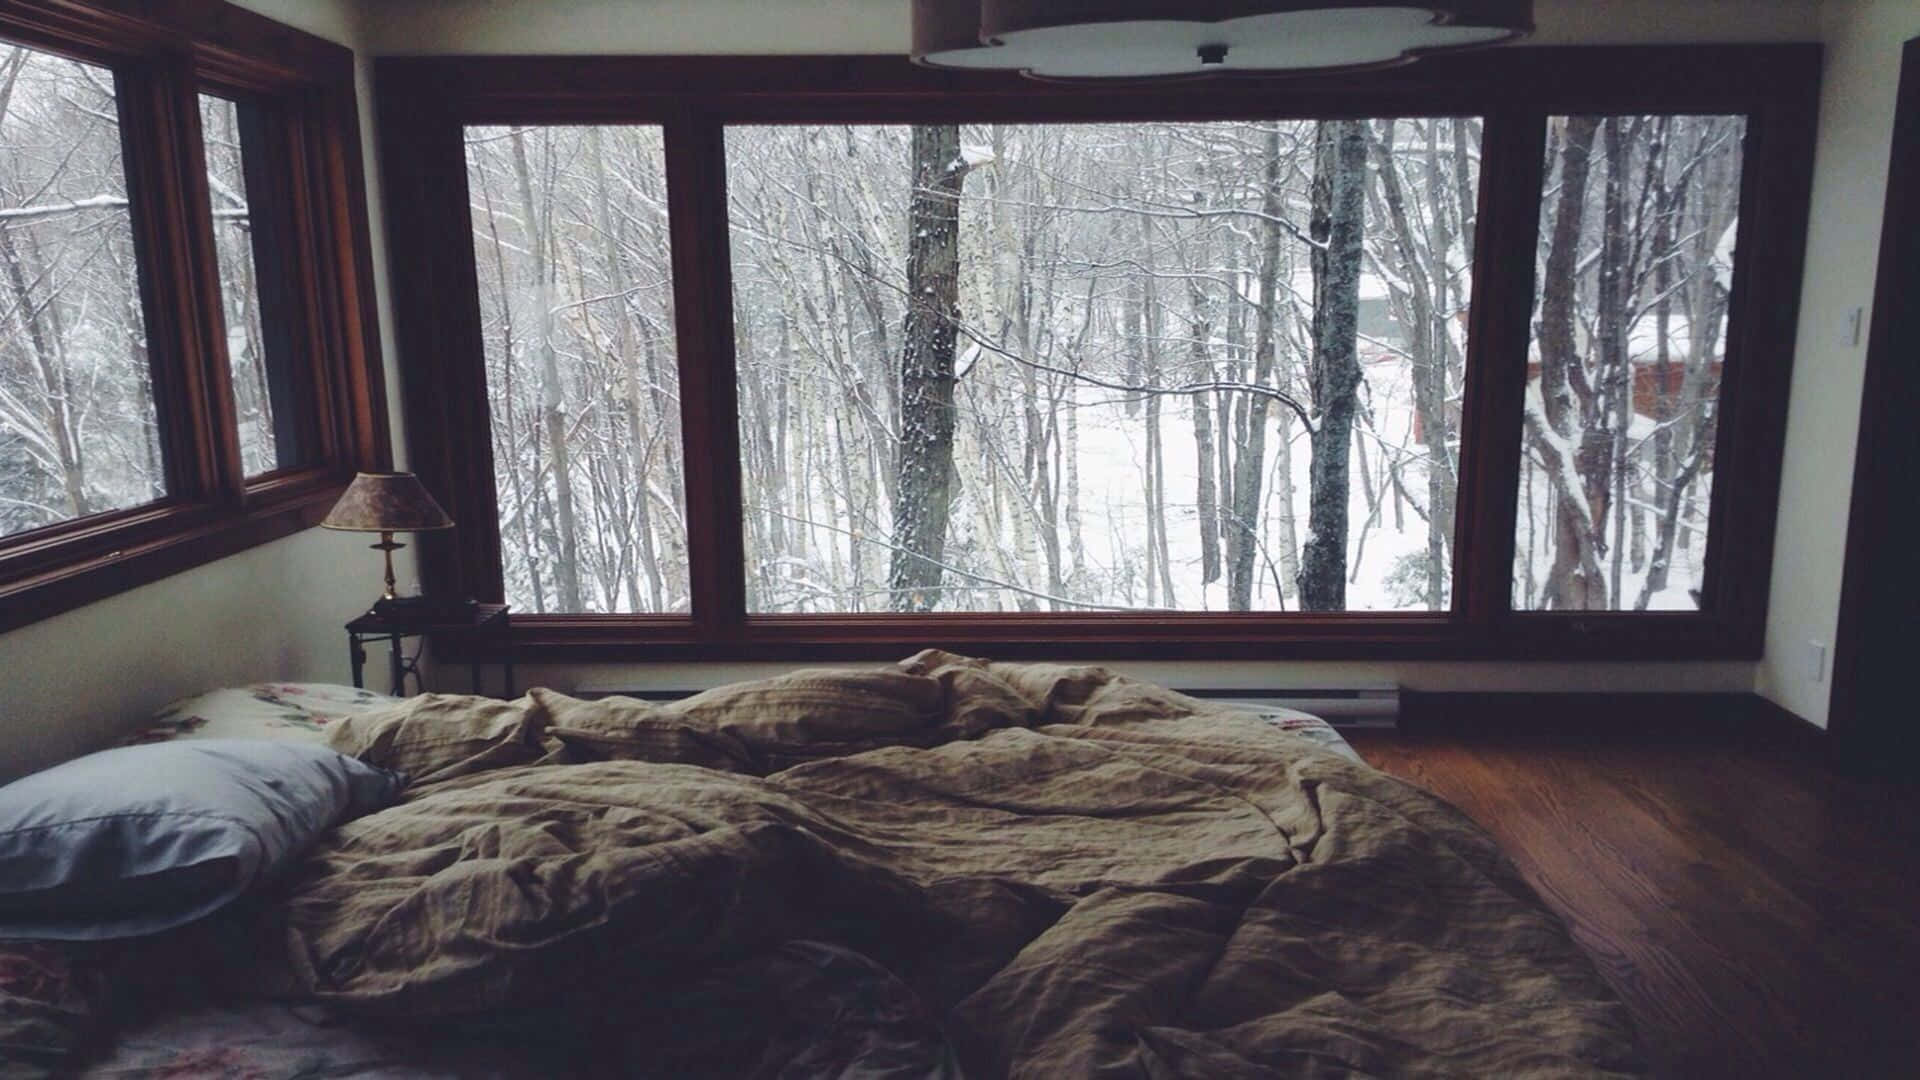 A Bed With A Blanket On It And A Window Wallpaper